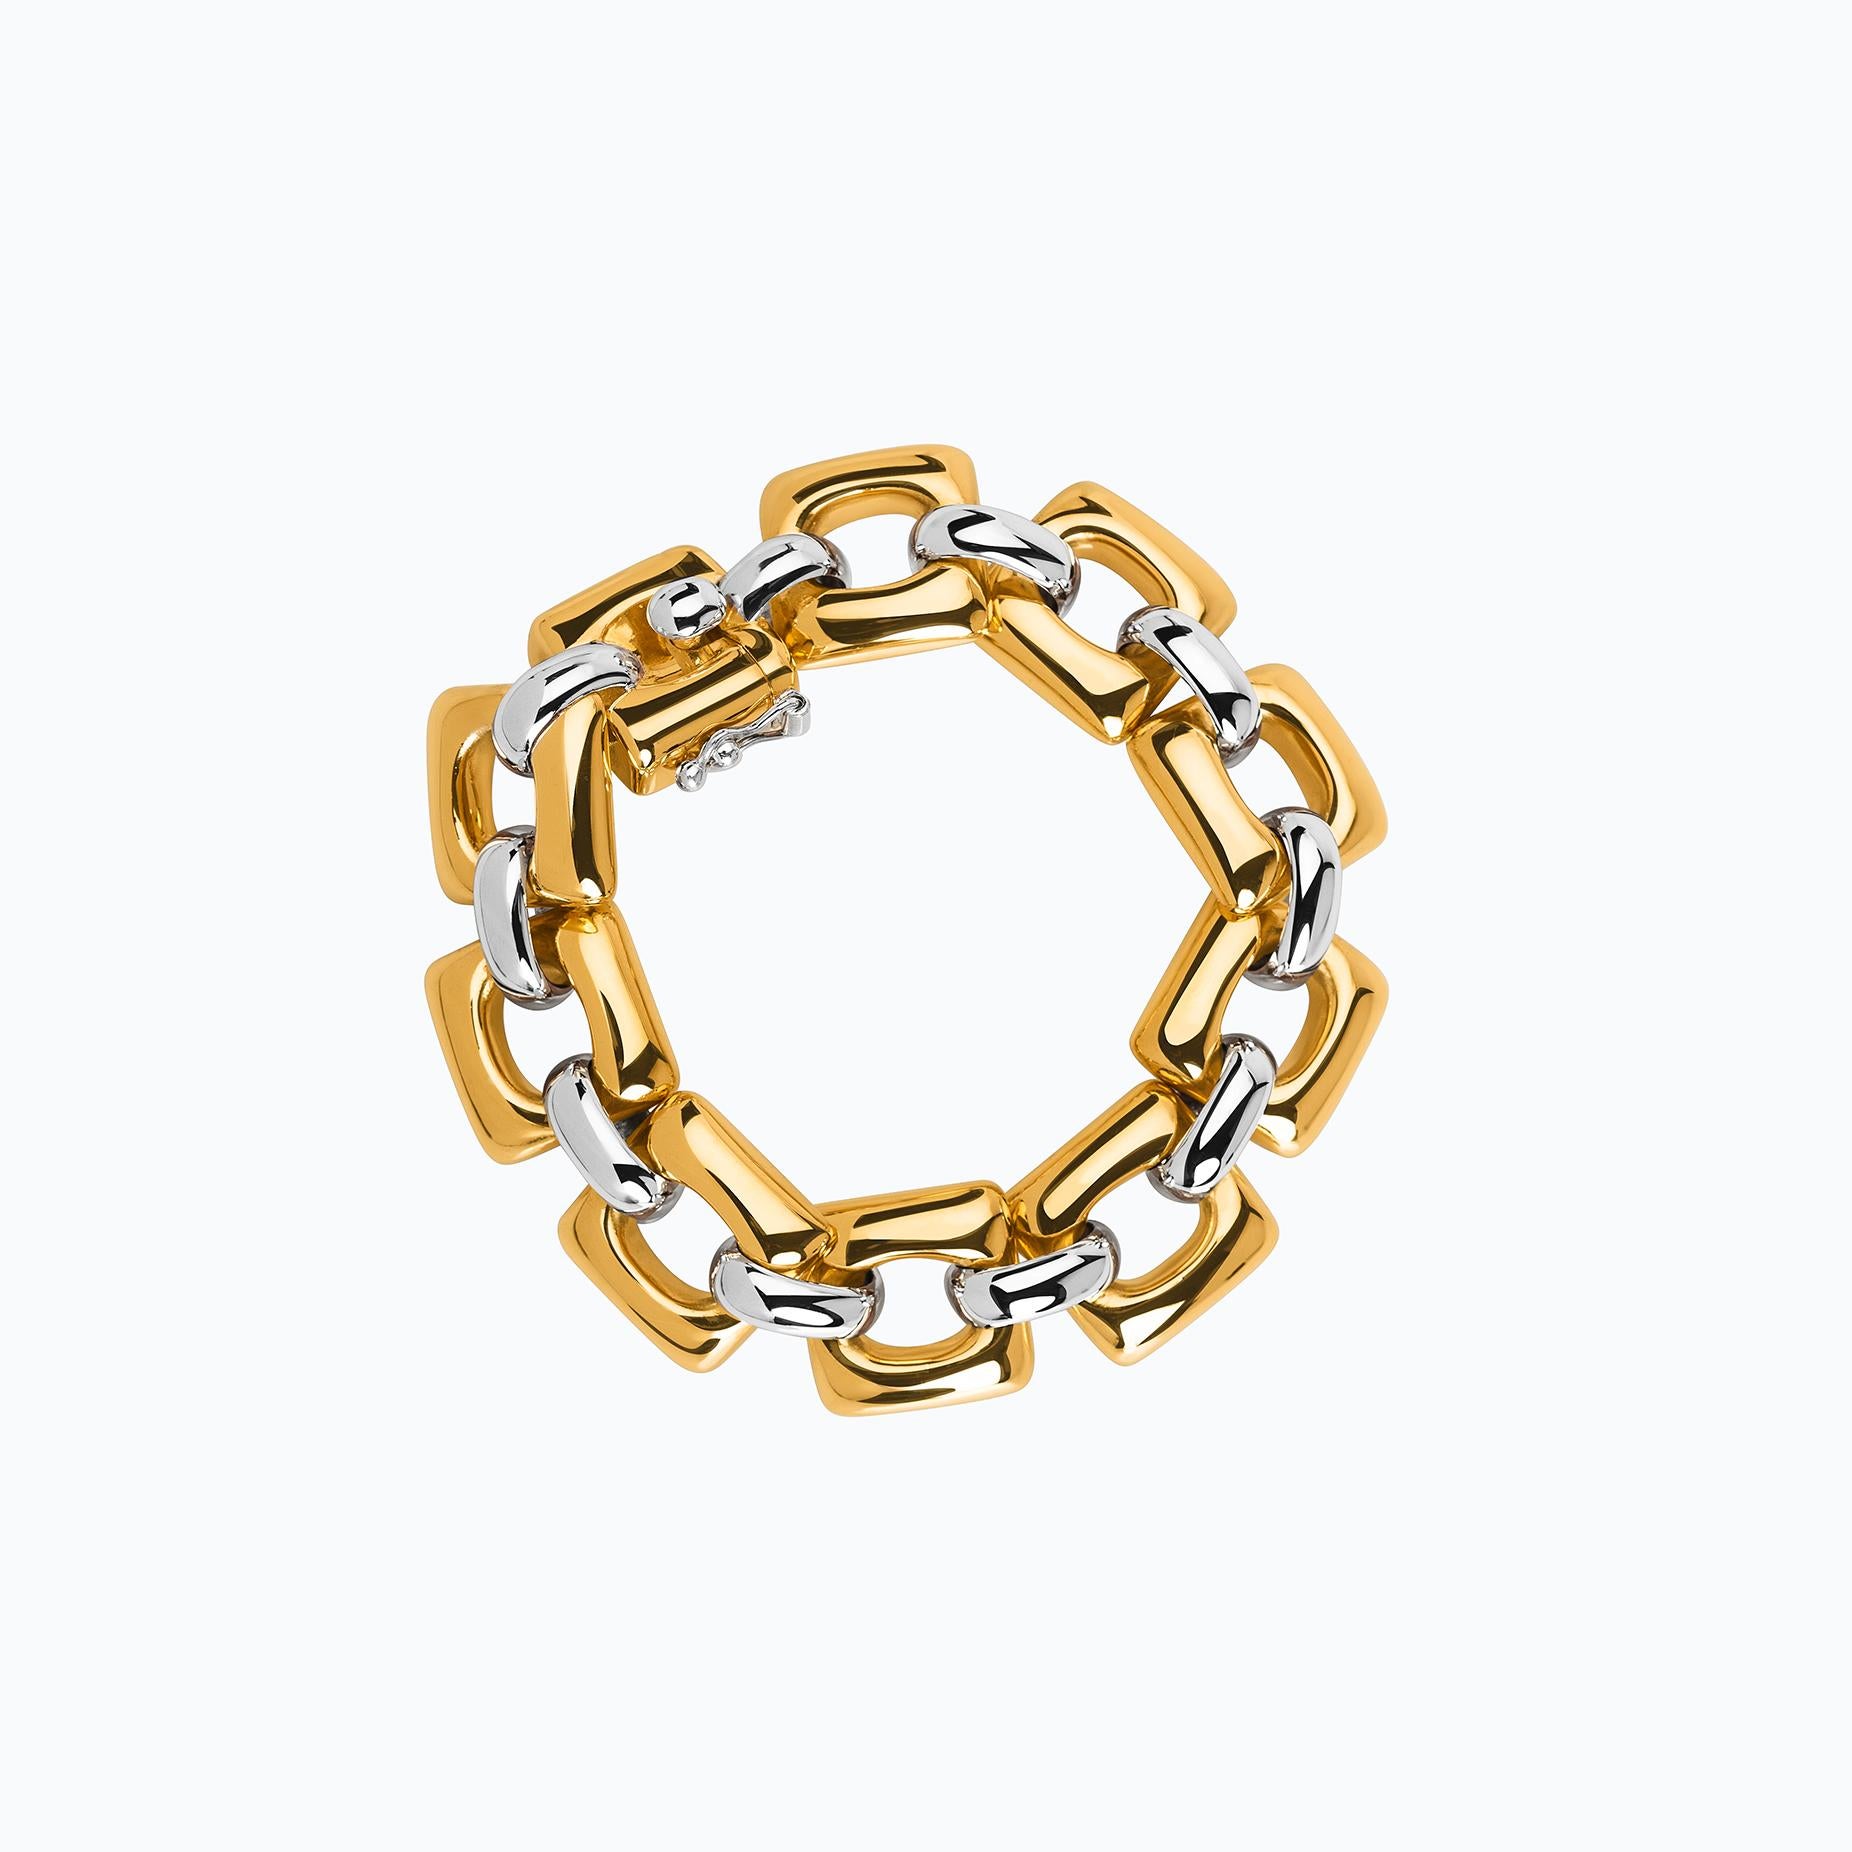 The Herencia Square and Oval Bracelet is part of a numbered limited edition of 80 units, made of sterling silver with 23 karat yellow gold vermeil. The piece is made up of a succession of square links finished in vermeil, interspersed with oval